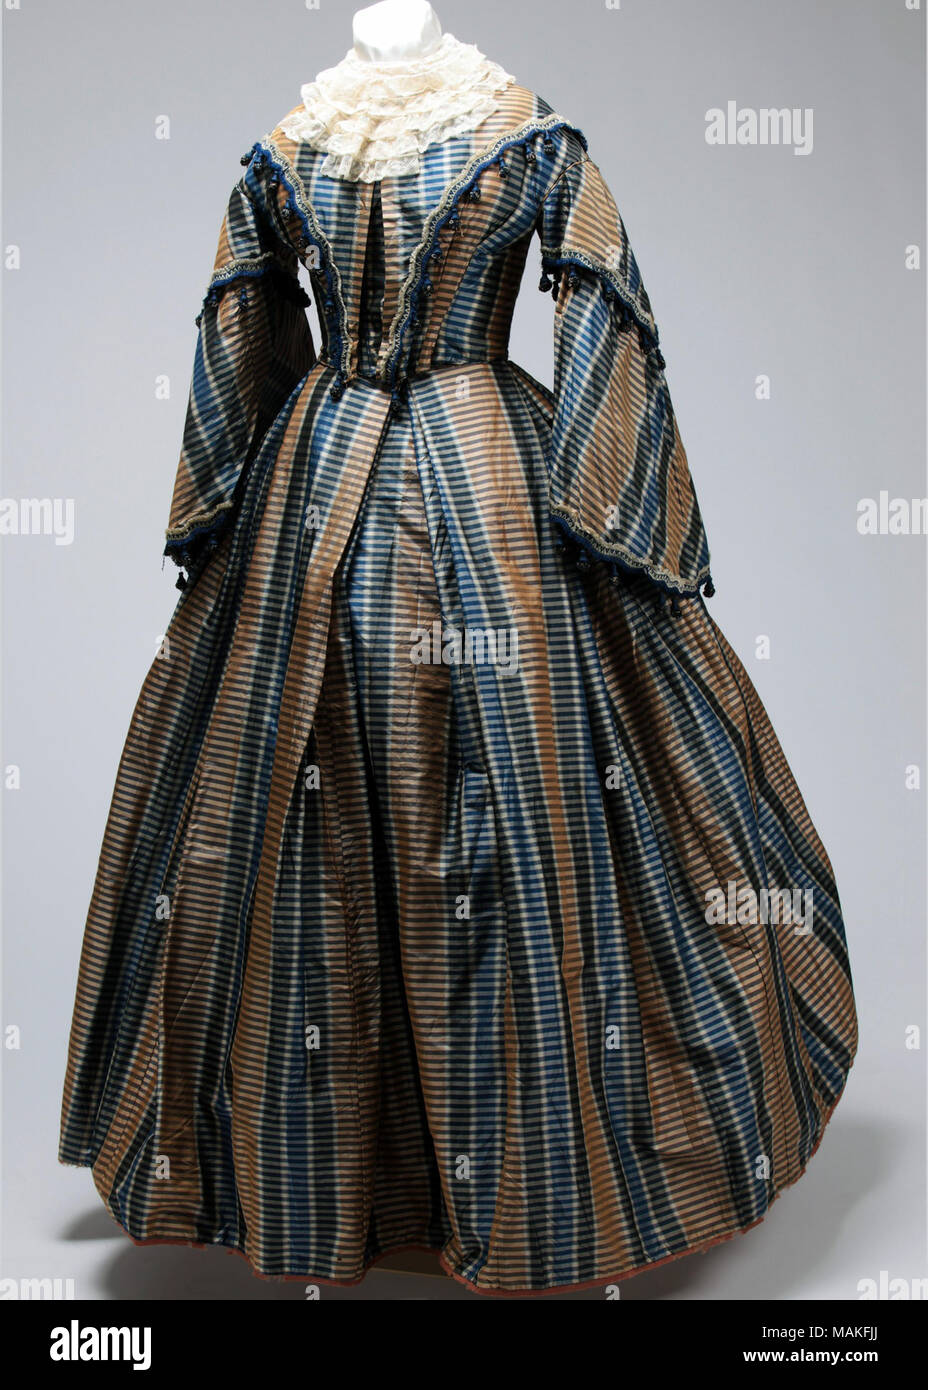 Woman's blue, brown and cream striped taffeta two-piece dress with close fitting bodice, pagoda sleeves, and full skirt. Title: Woman's Two-Piece Striped Taffeta Evening Gown  . between circa 1853 and circa 1856. Stock Photo